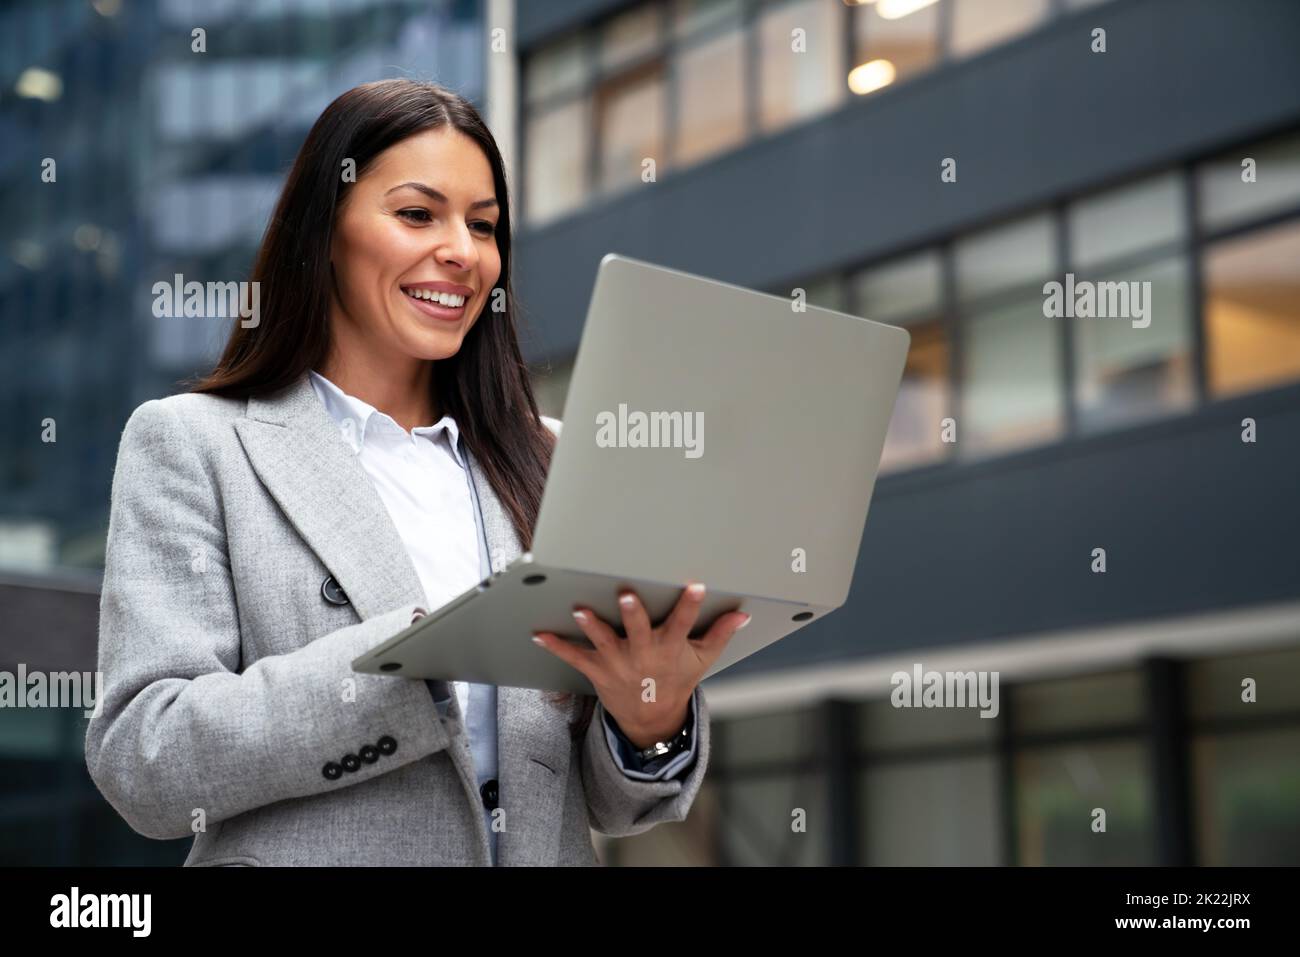 Beautiful business professional woman in the city outdoor. Business work people lifestyle concept Stock Photo